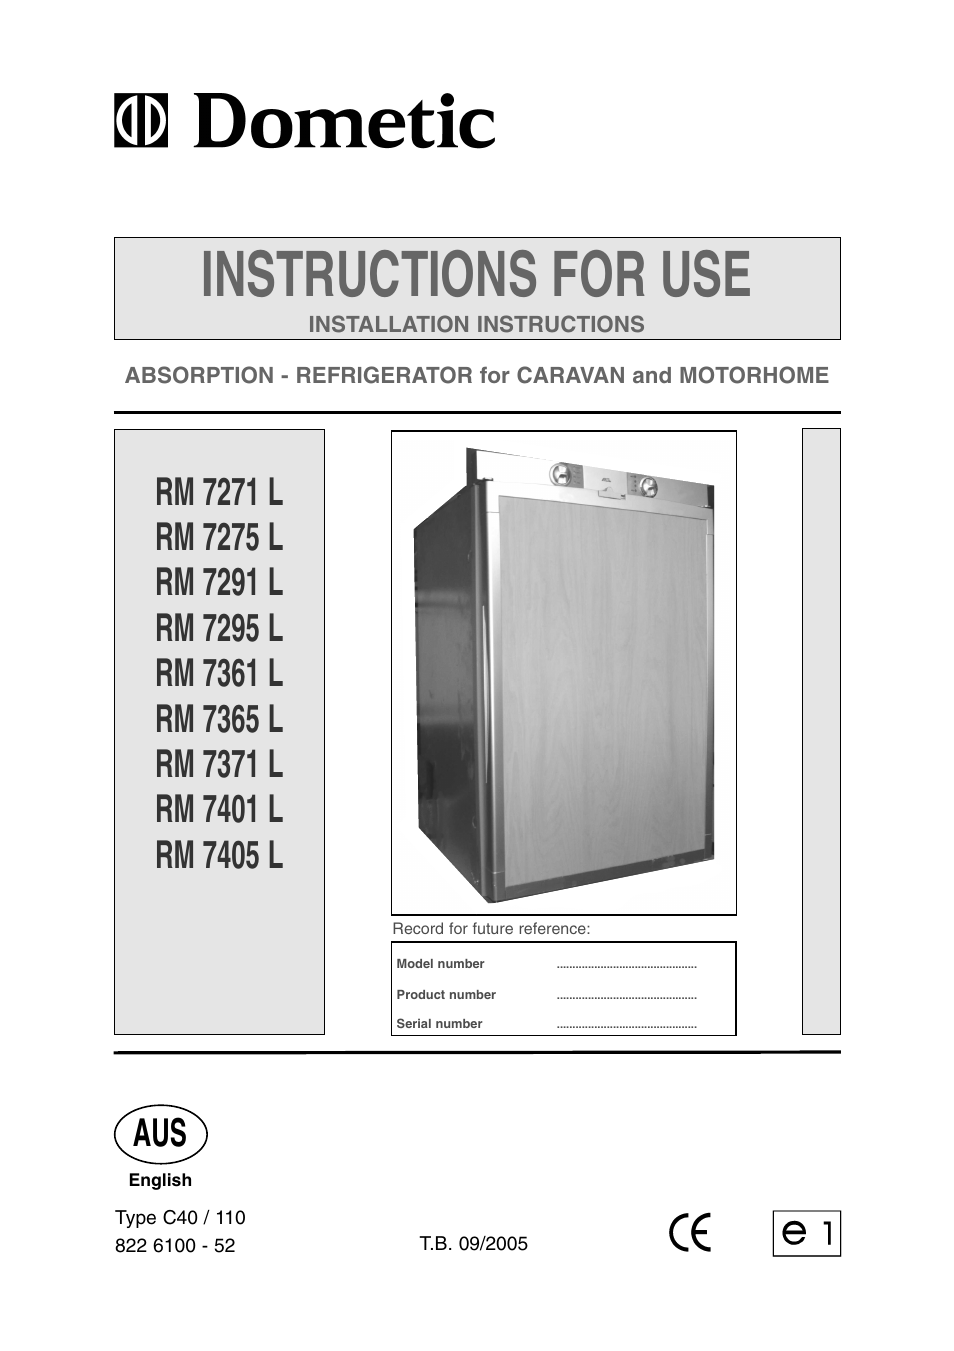 Dometic RM 7361 L User Manual | 28 pages | Also for: RM 7371 L